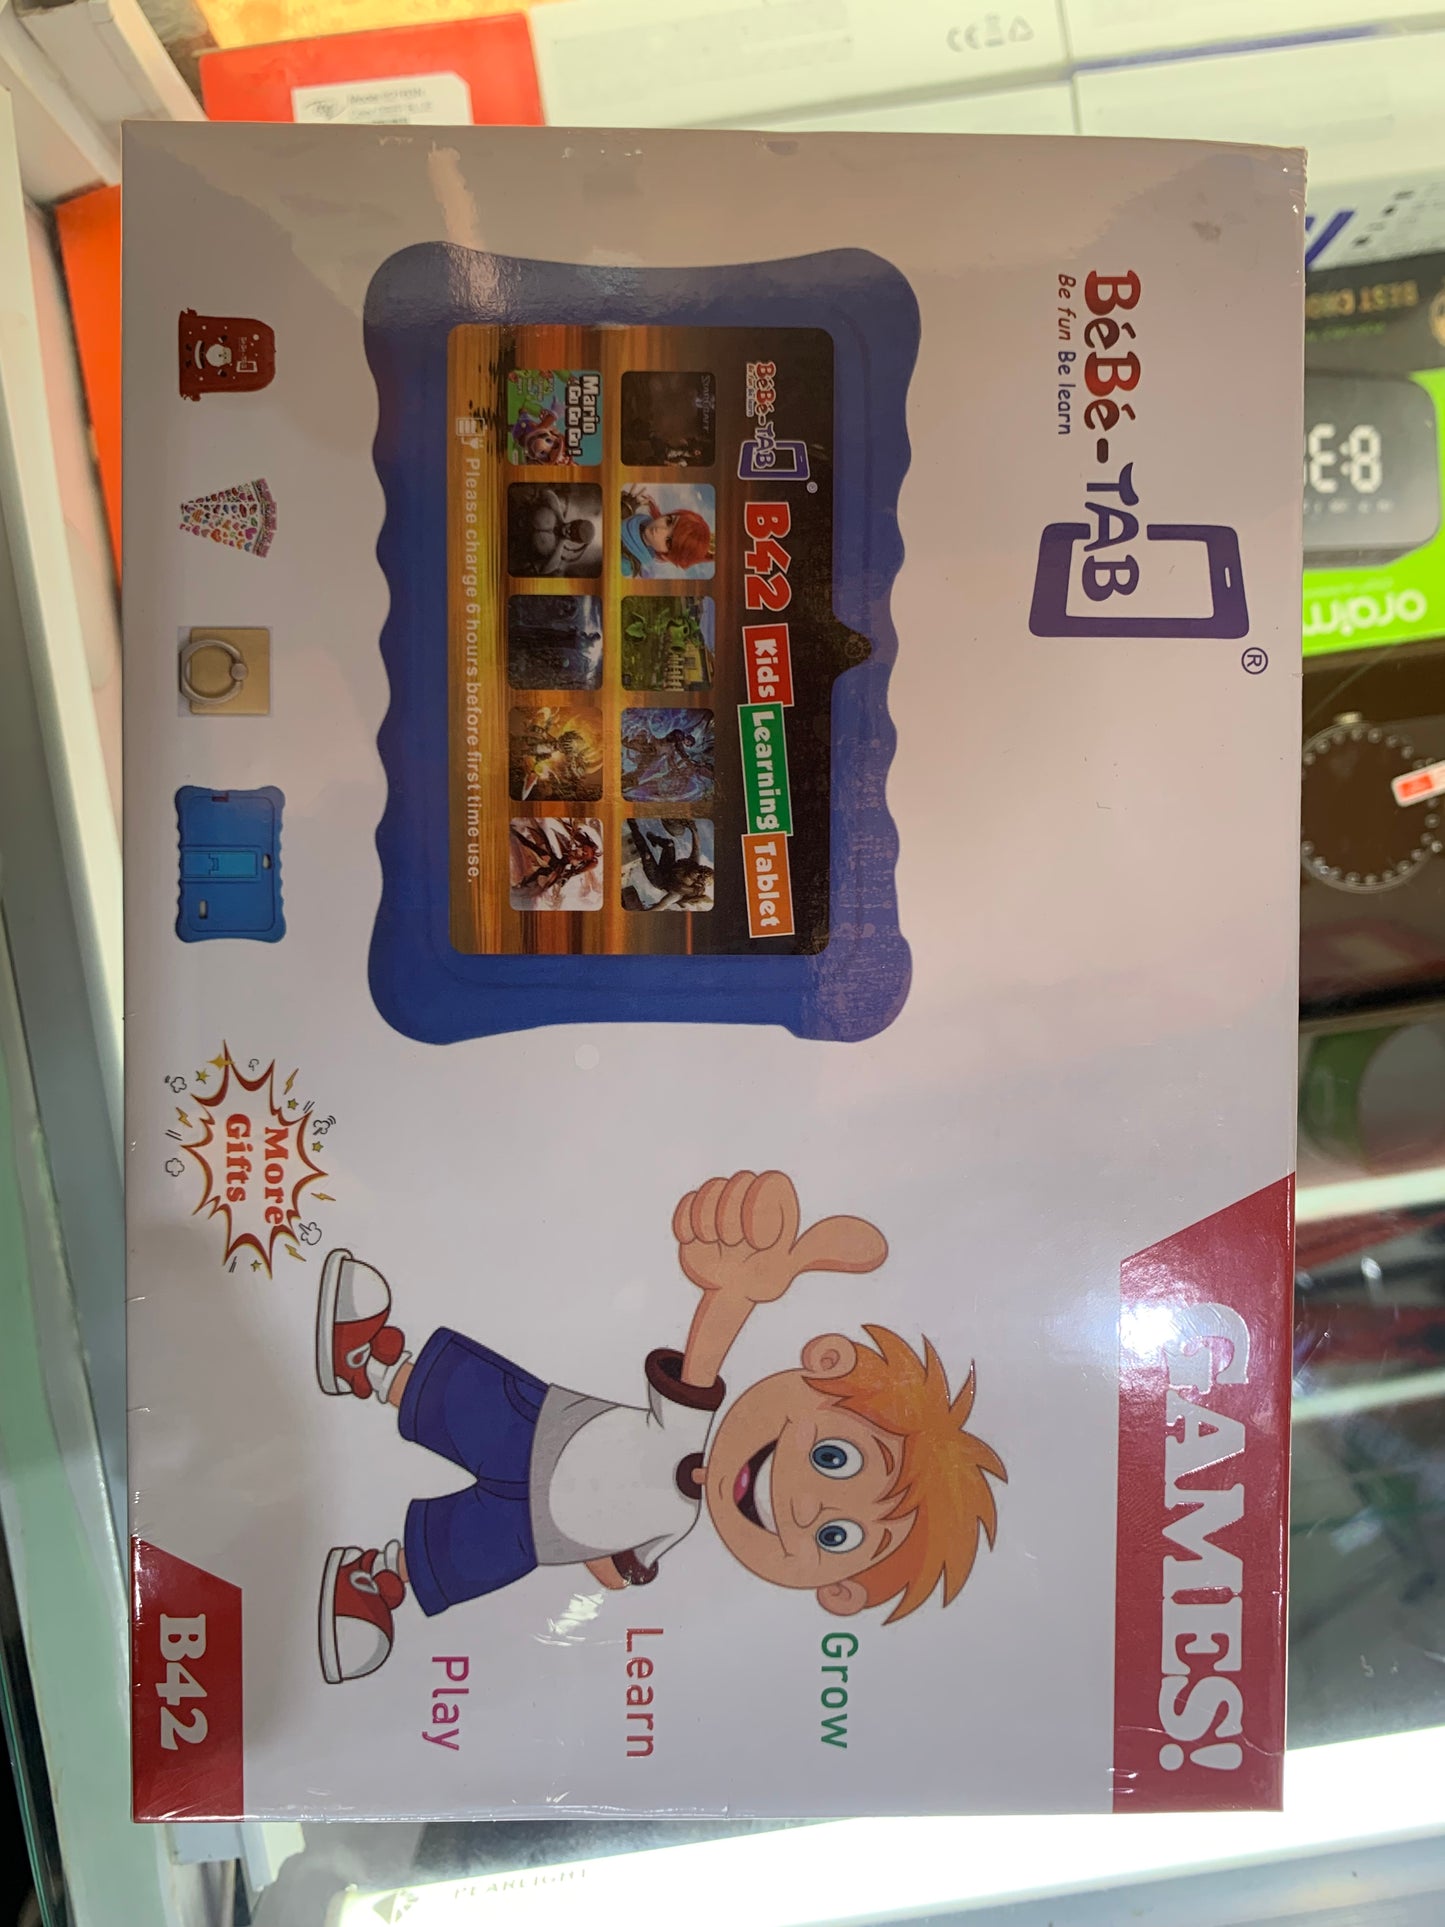 Bebe B42 Kids Tablet - 7" - 2GB RAM - 32GB ROM - Android 8.1 - 3000mAh - Blue (wifi support only)